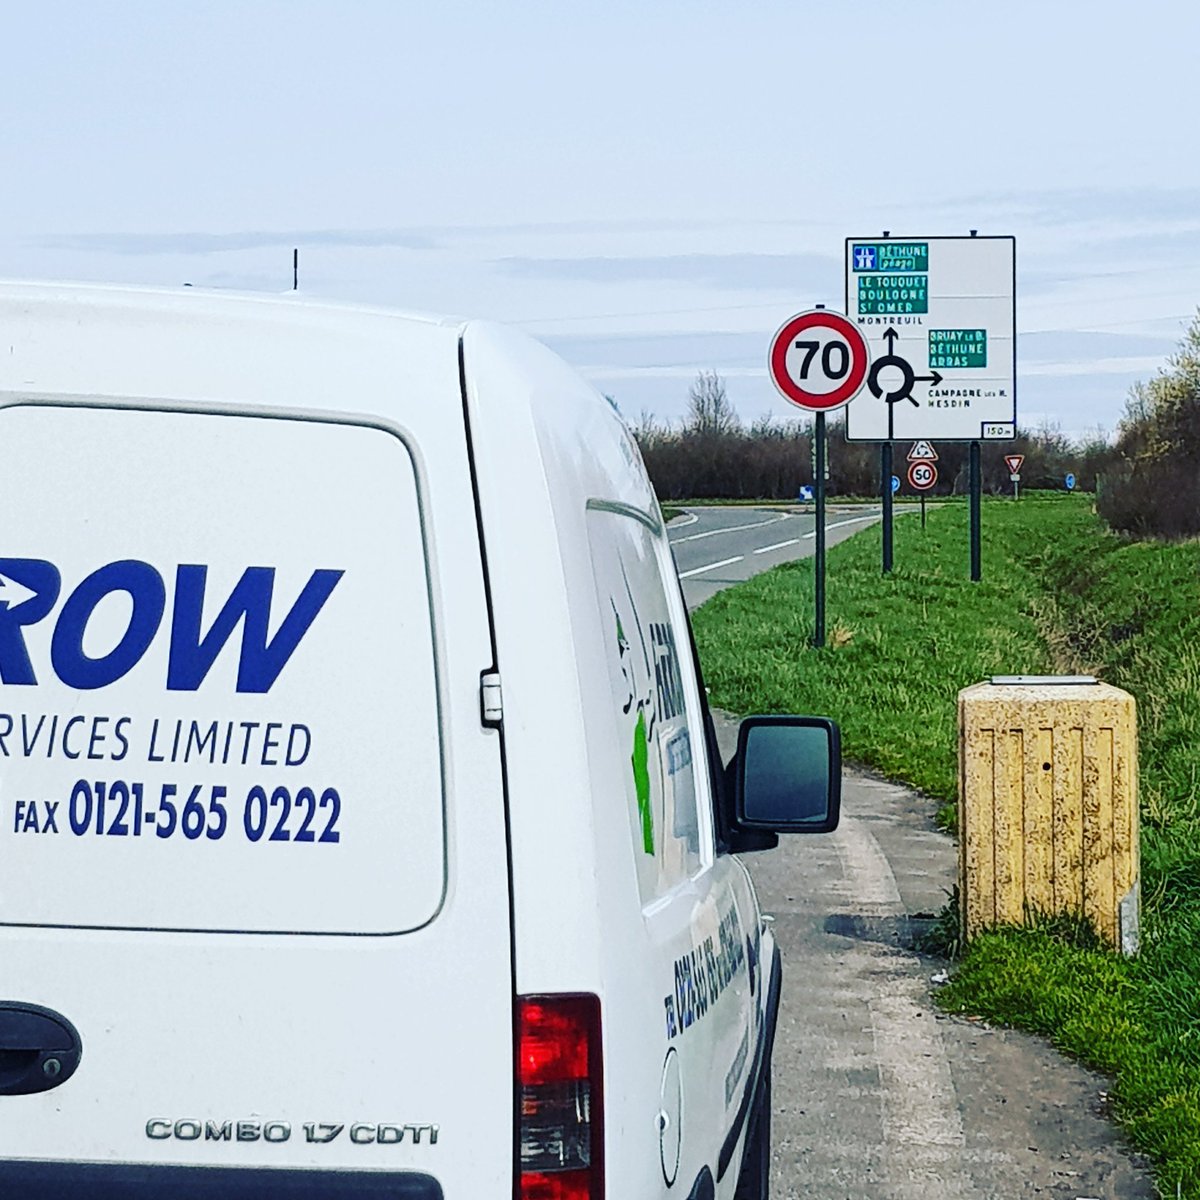 On the way back to #Blighty after another successful drop south of #paris

#uk #france #Europe #delivery #BankHolidayMonday #ilovemyjob #wheelsofindustry #beyondextramile #logistics #courier #transport